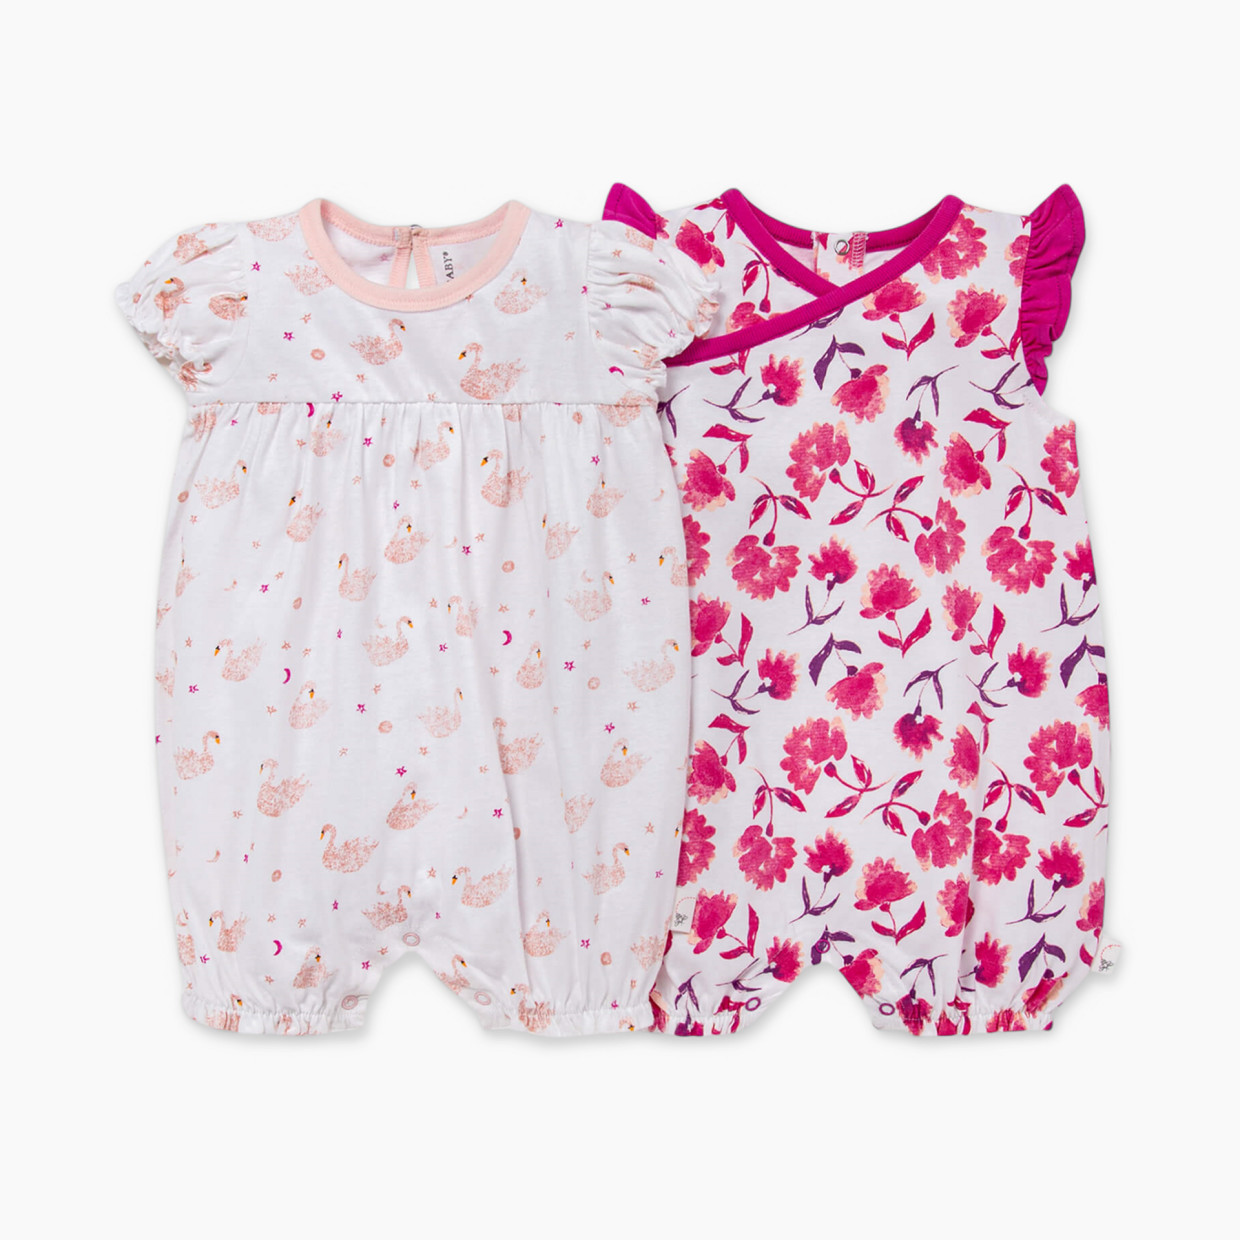 Burt's Bees Baby 2 Pack Rompers - Graceful Swans, 3-6 Months.